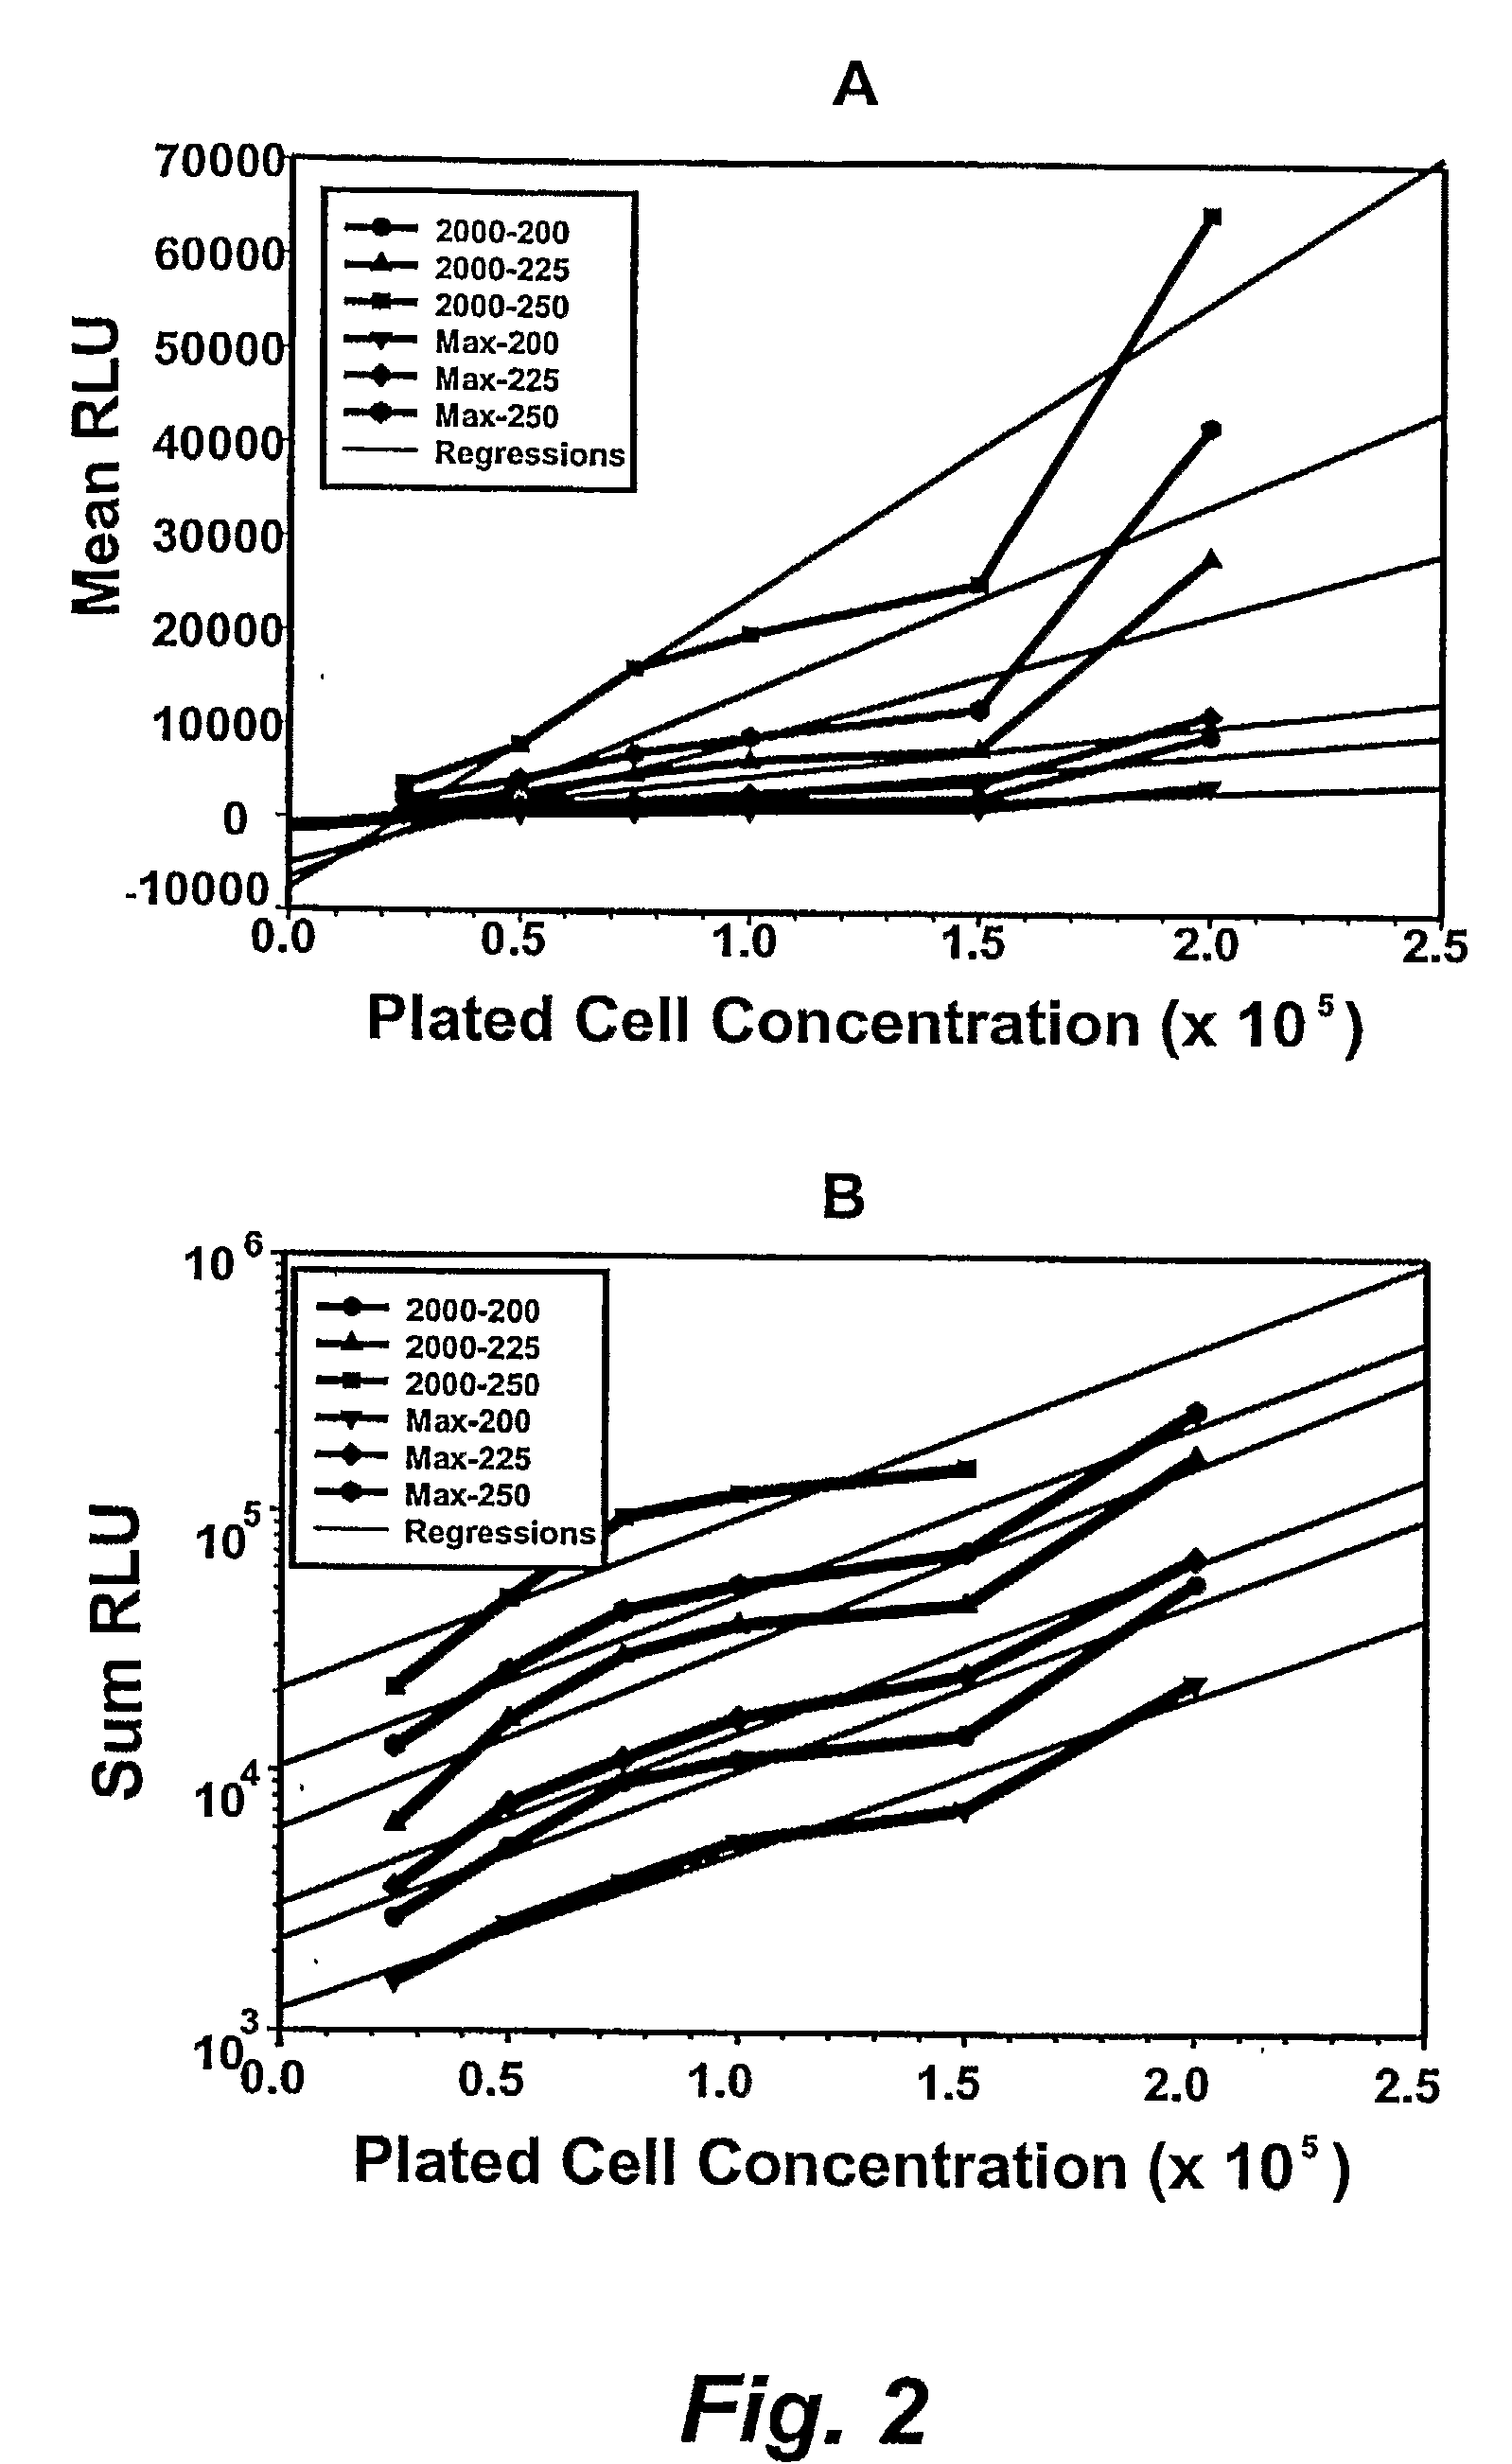 Methods of Screening Compounds to Predict Toxicity and Residual Proliferative and Differentiation Capacity of the Lympho-Hematopoietic System